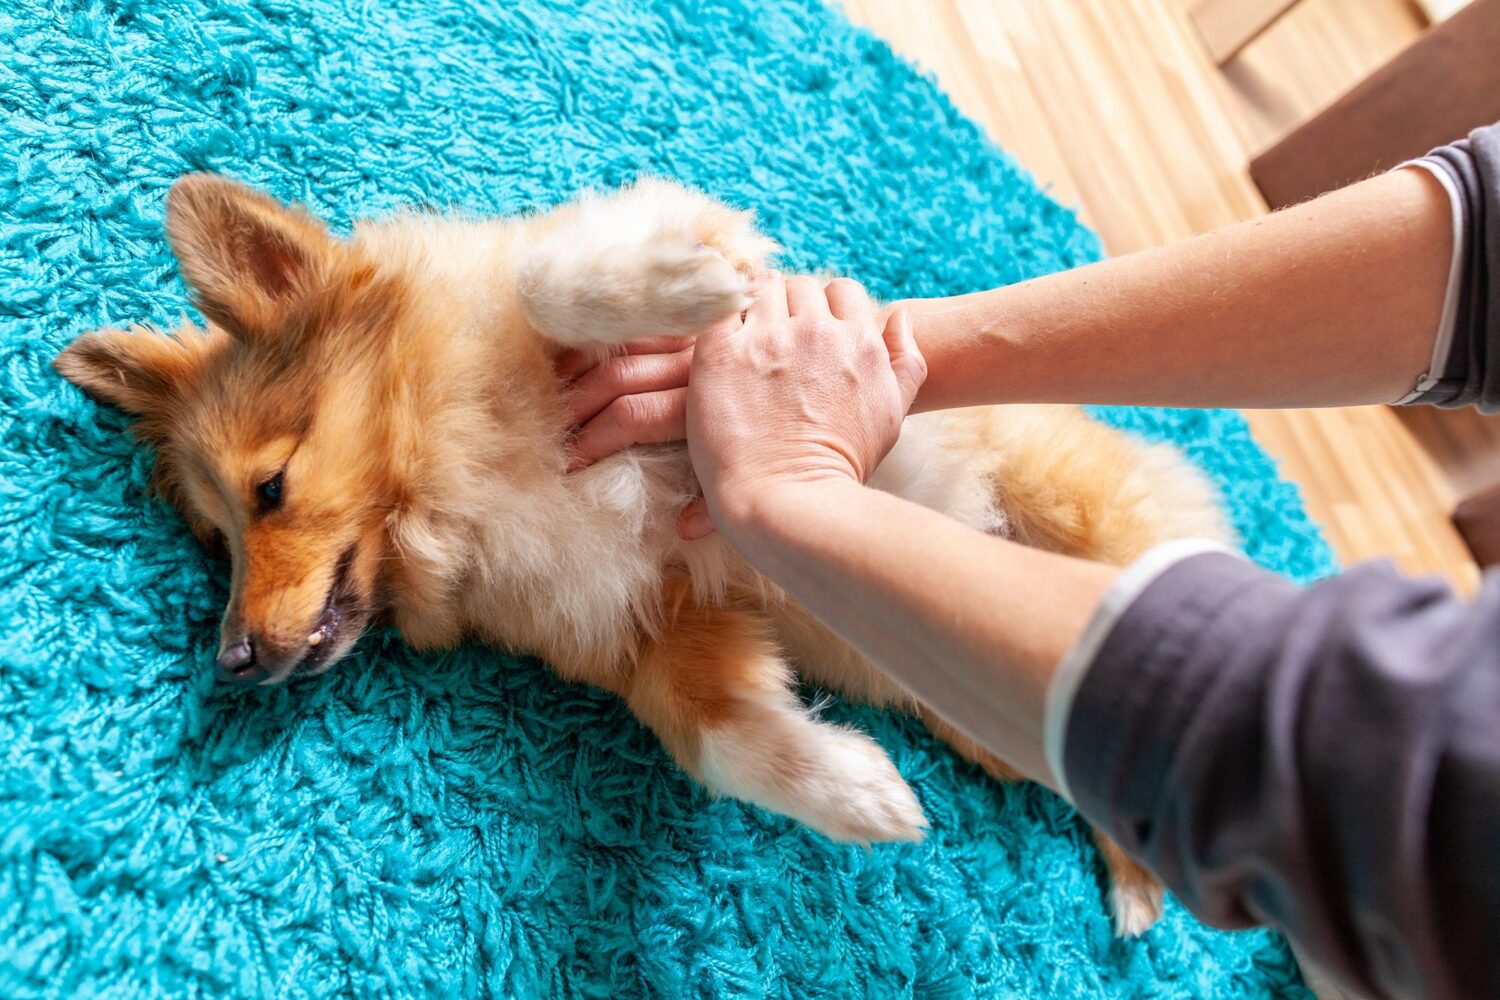 How To Perform First Aid On A Dog